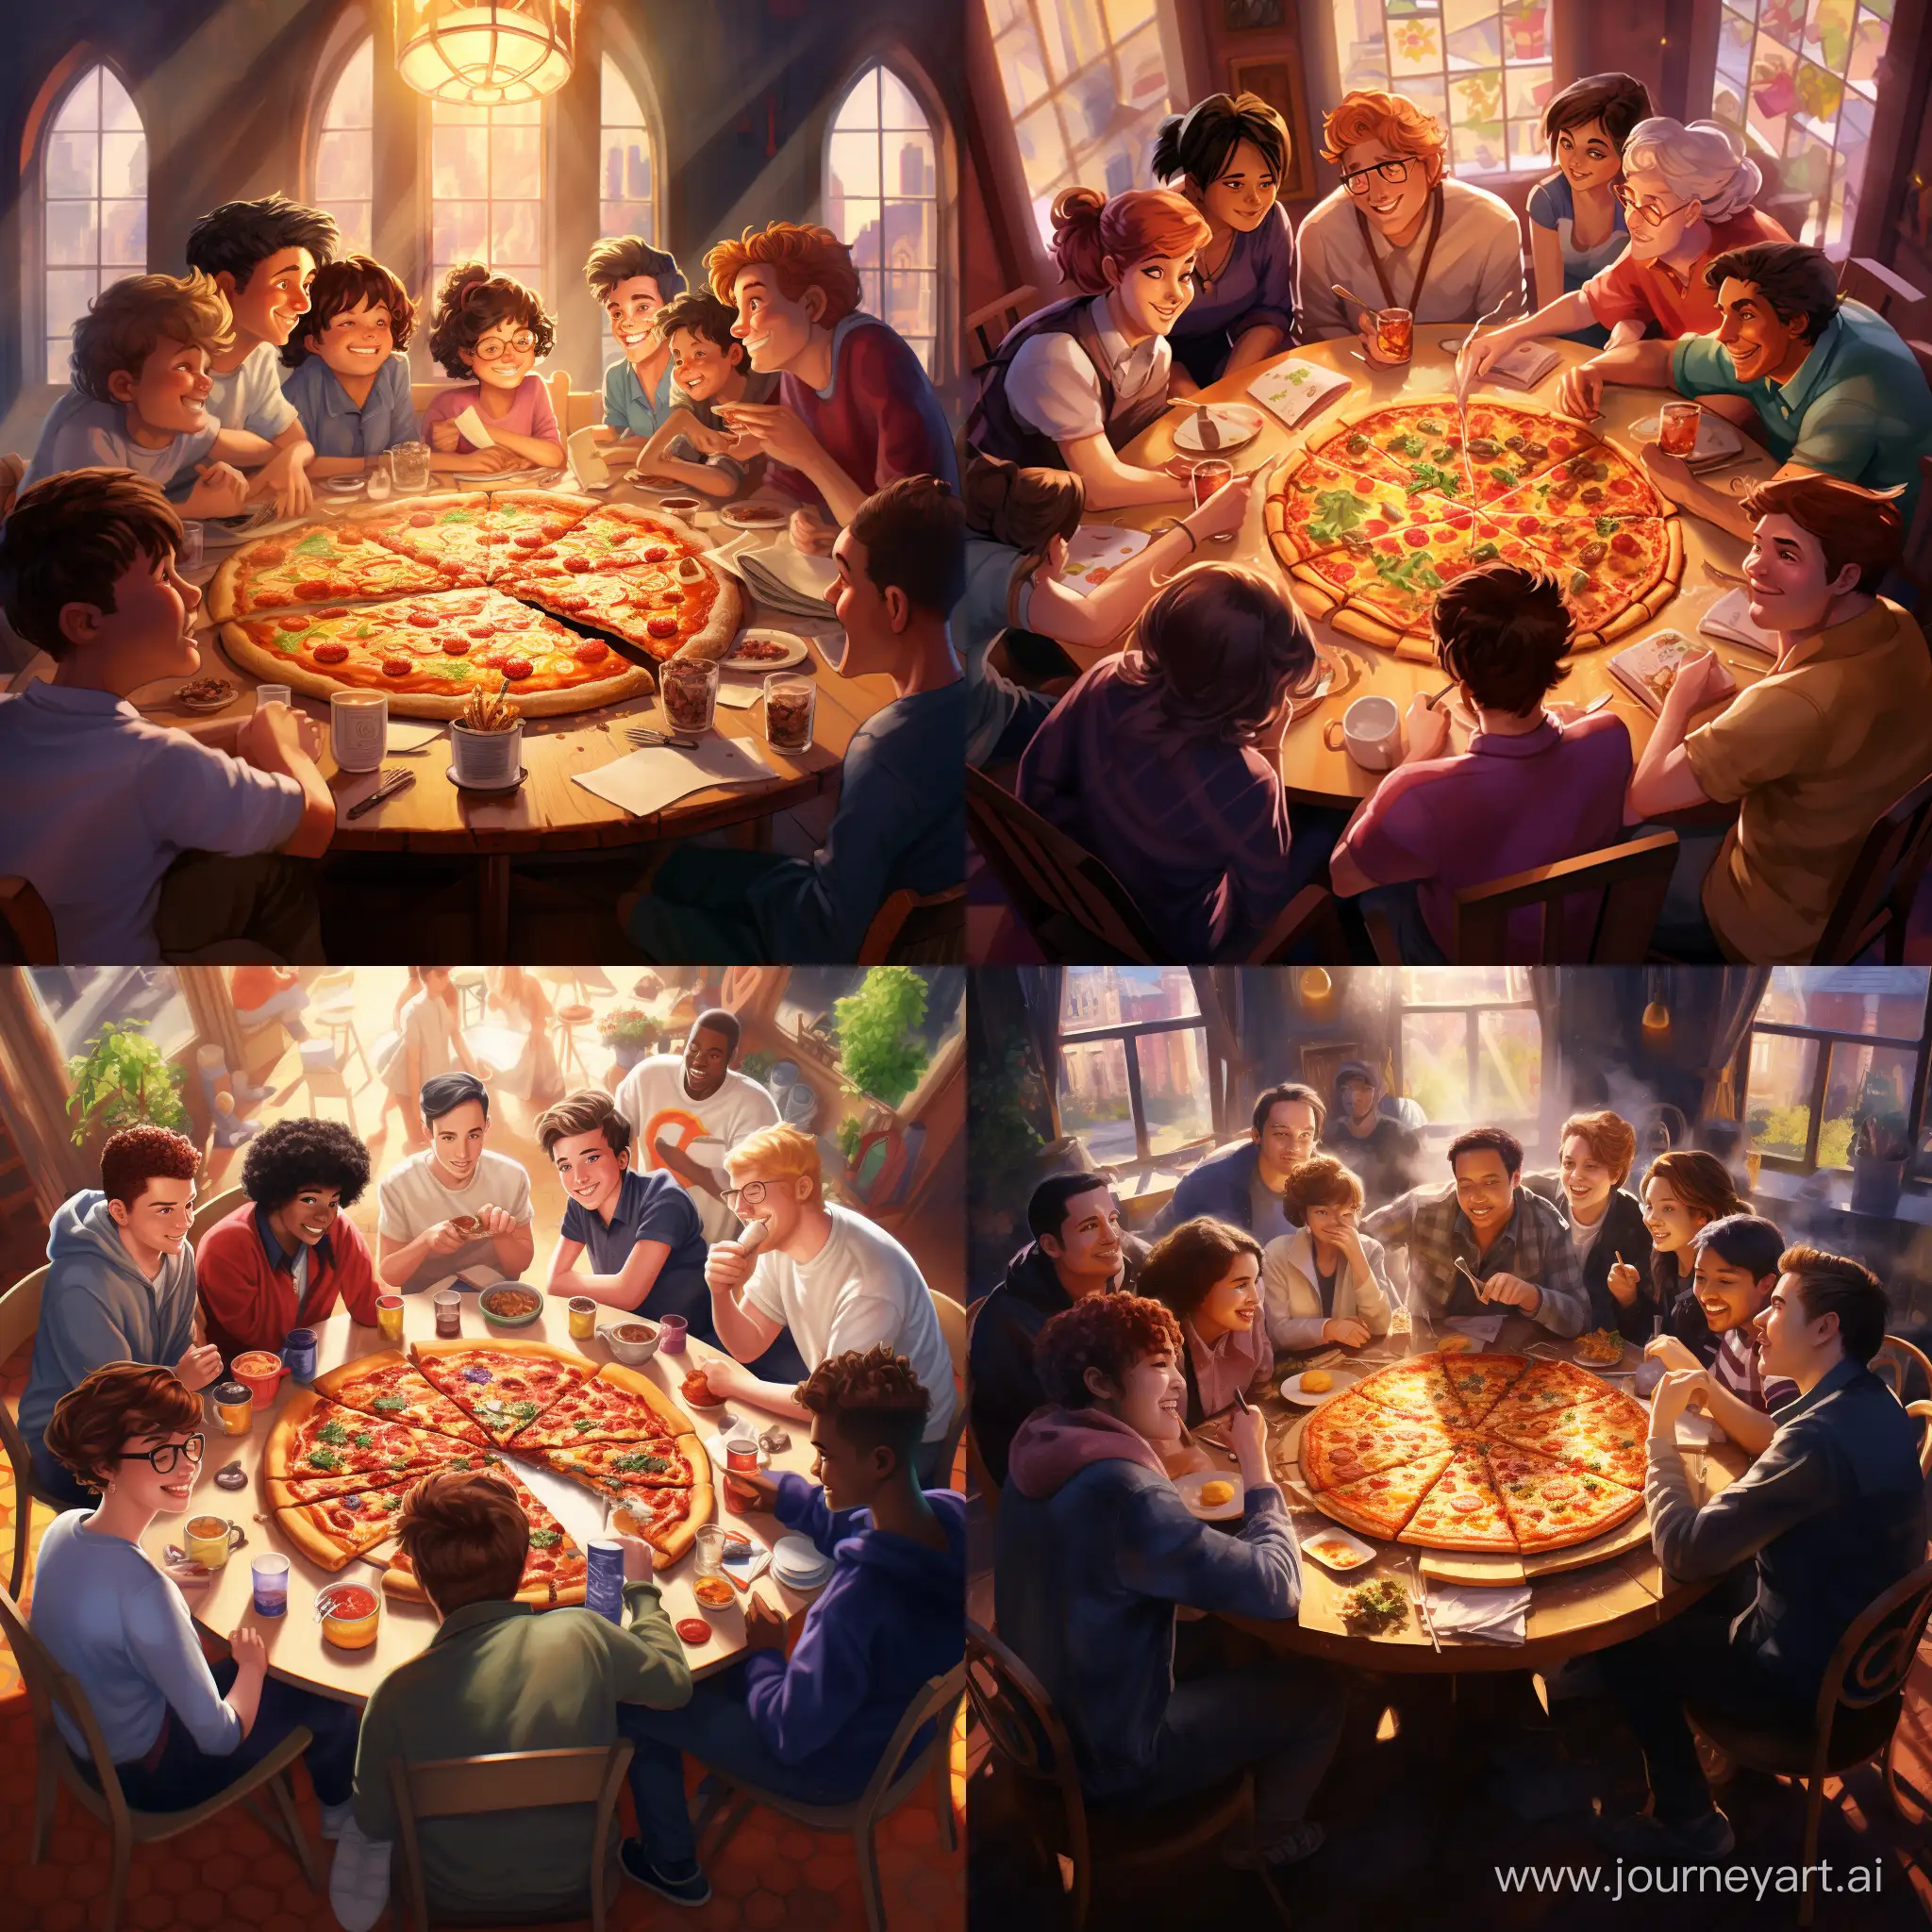 Friends-Enjoying-a-Large-Pizza-Feast-Around-Round-Table